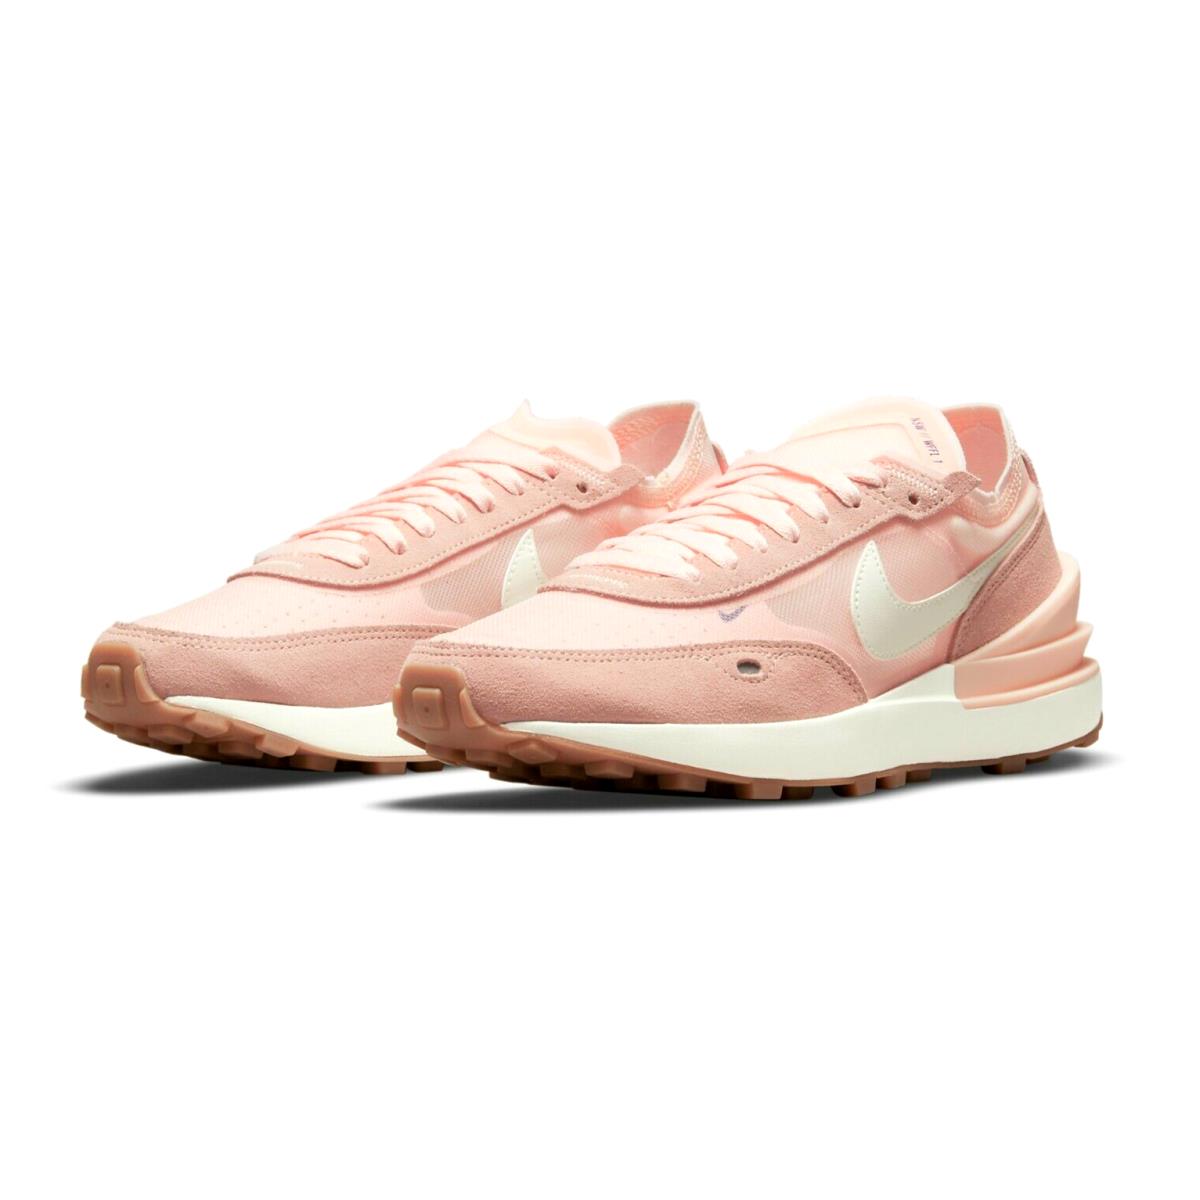 Nike Waffle One Womens Size 7 Sneaker Shoes DC2533 801 Pale Coral White